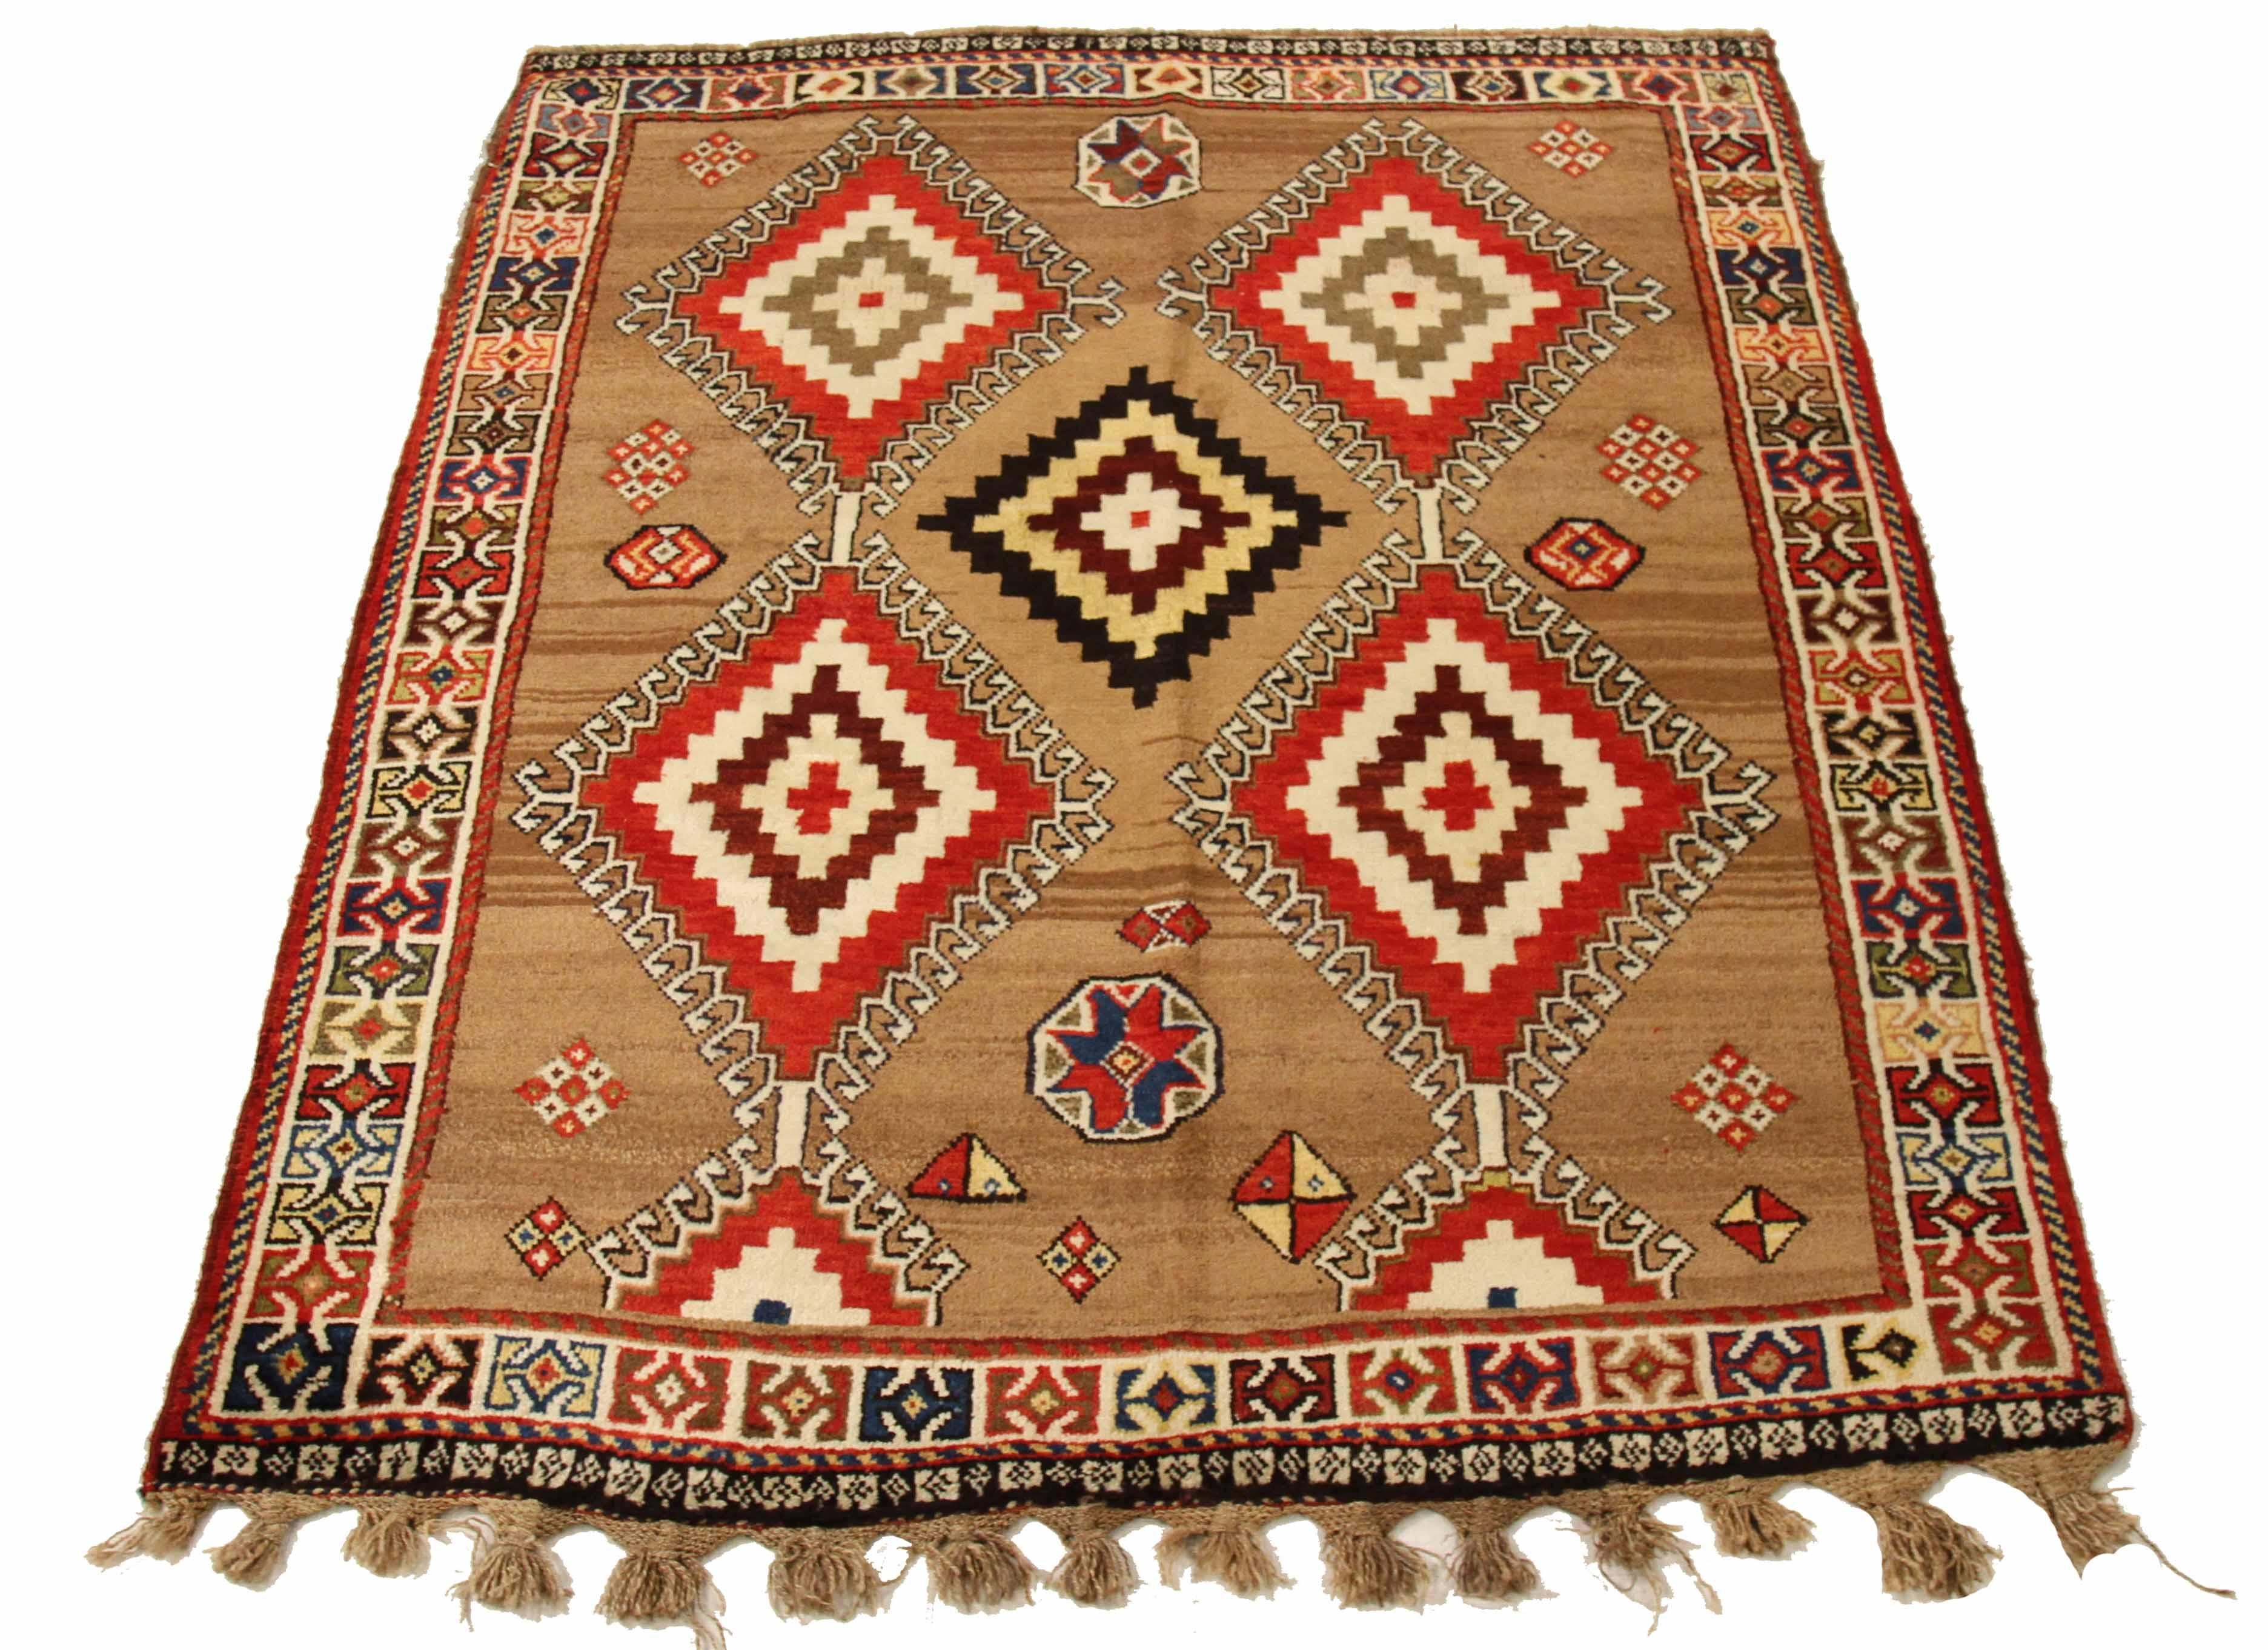 Antique Persian Area Rug, handcrafted from the finest sheep's wool and colored with all-natural vegetable dyes that are safe for humans and pets. The expert artisans have woven it in a traditional Shiraz design, making it a beautiful addition to any